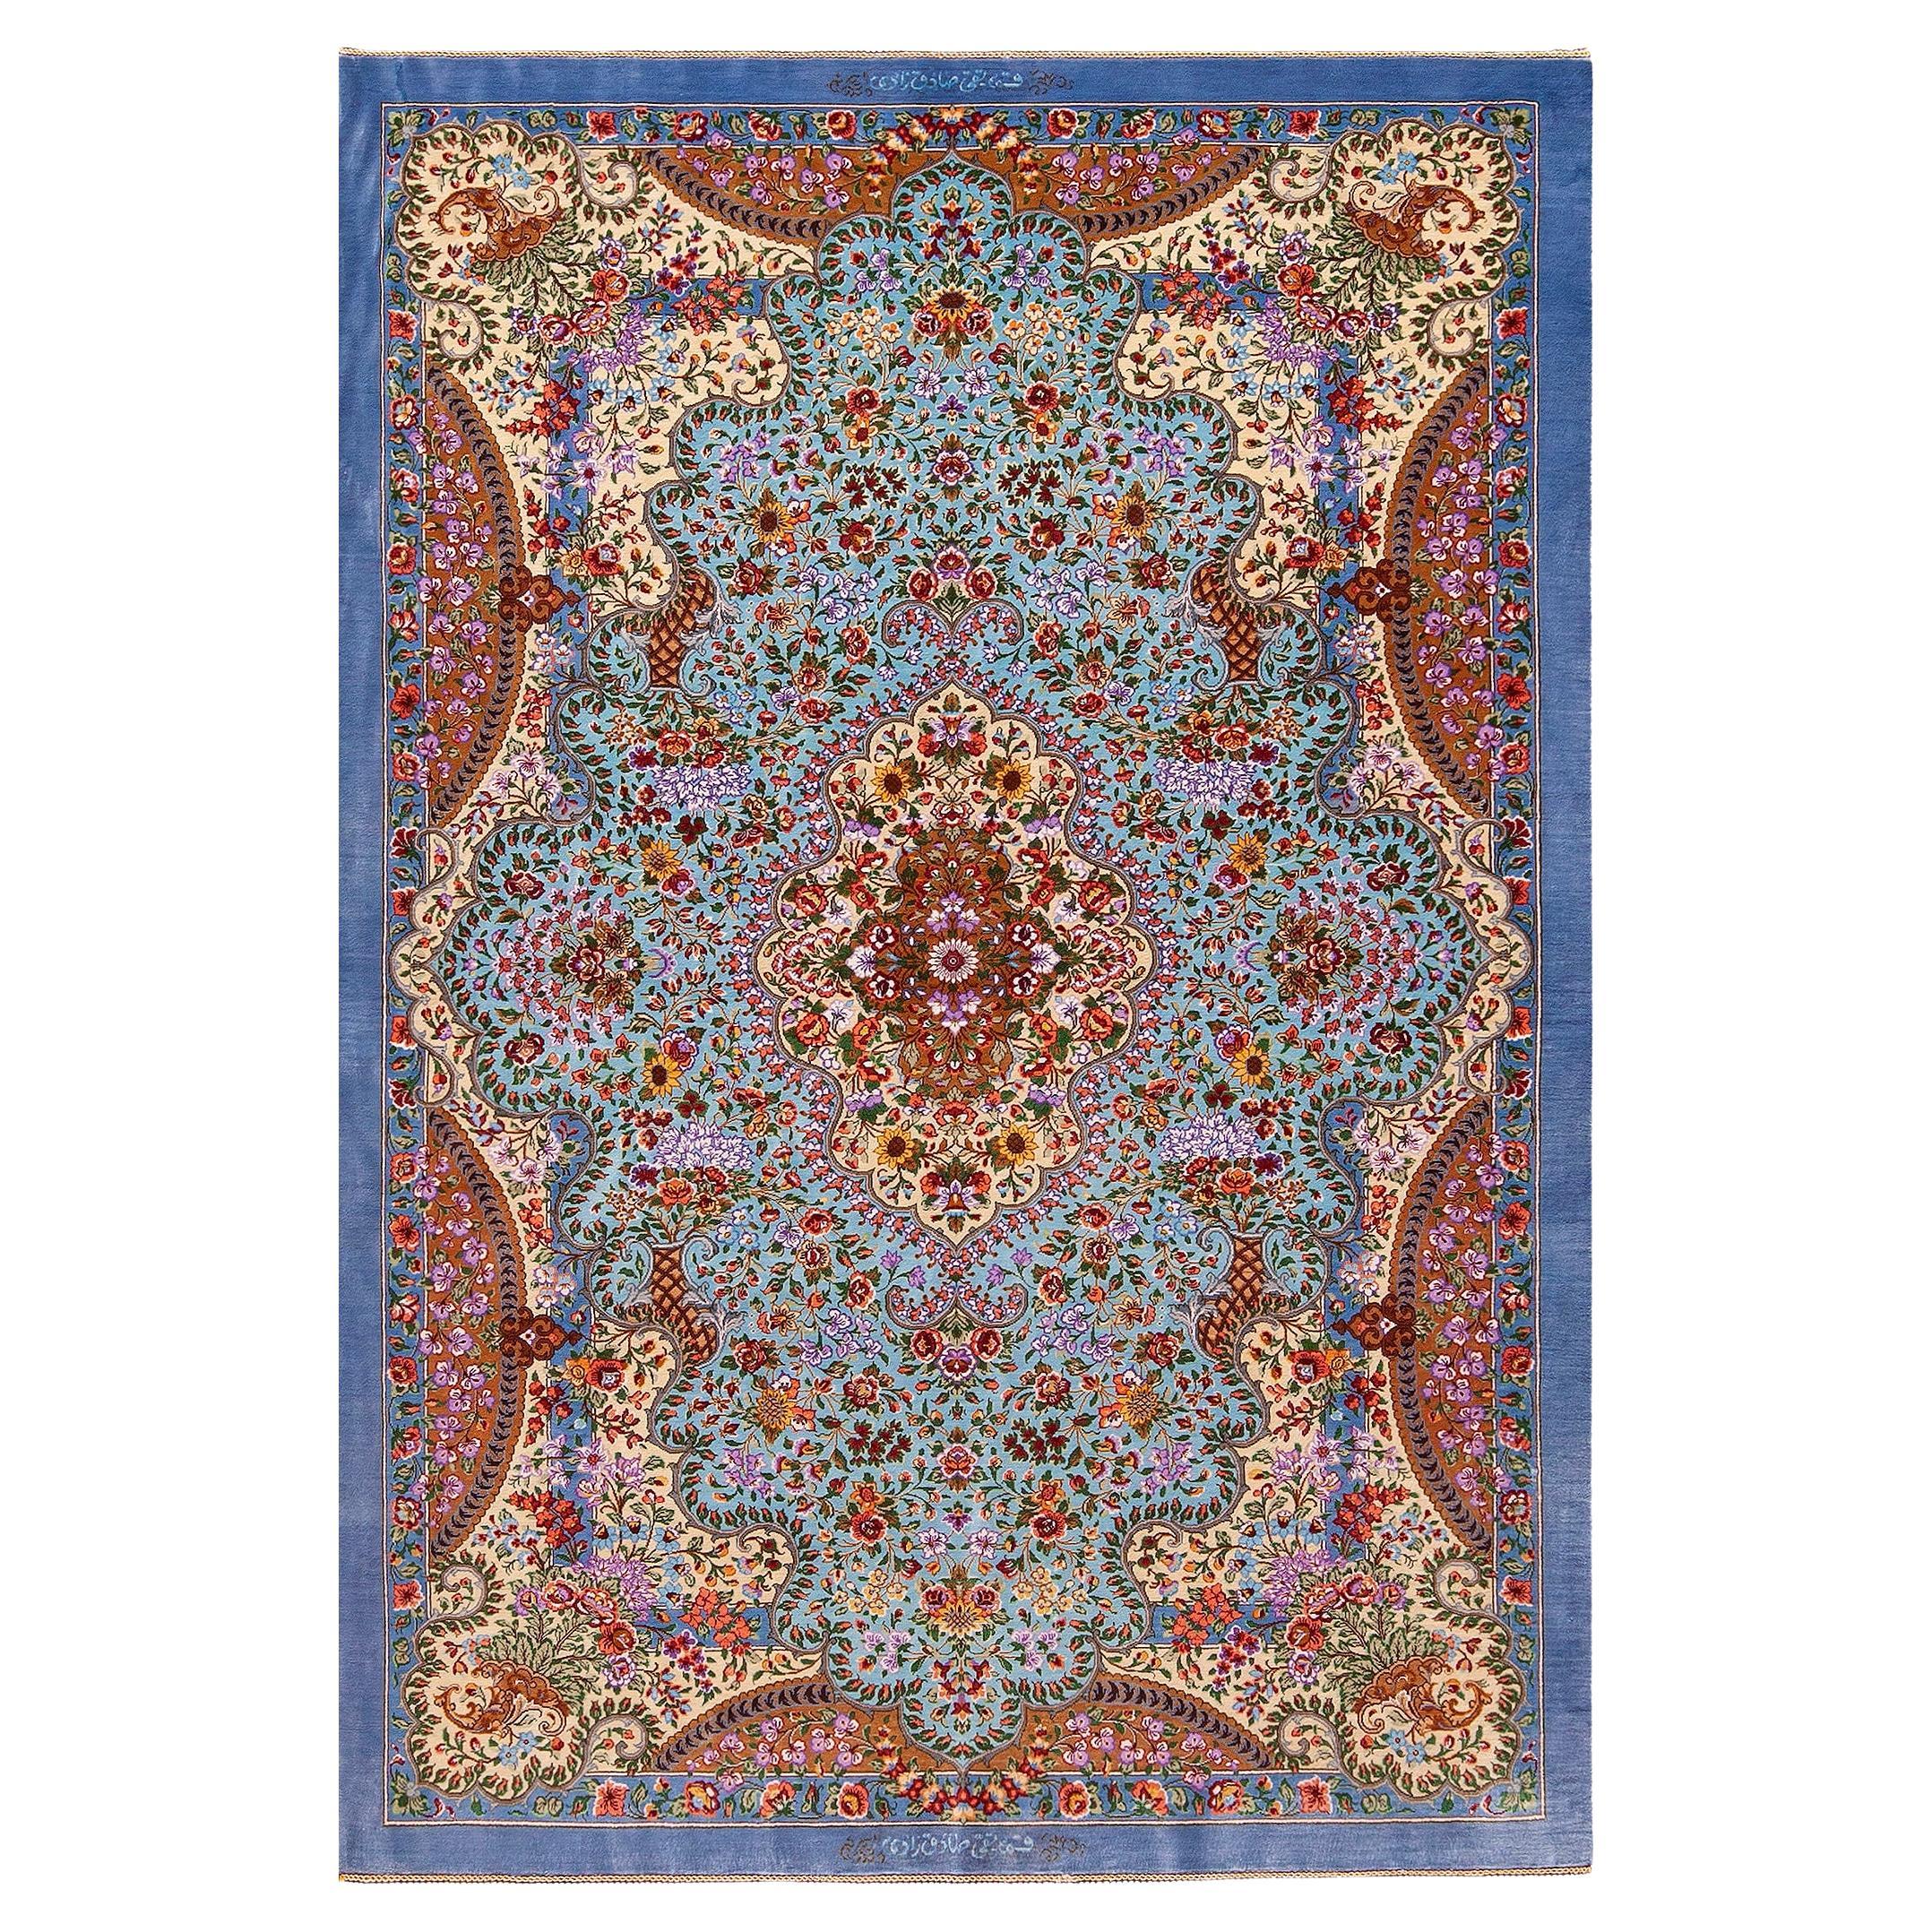 Amazing Small Fine Floral Luxurious Vintage Persian Silk Qum Rug 3'6" x 5'2" For Sale